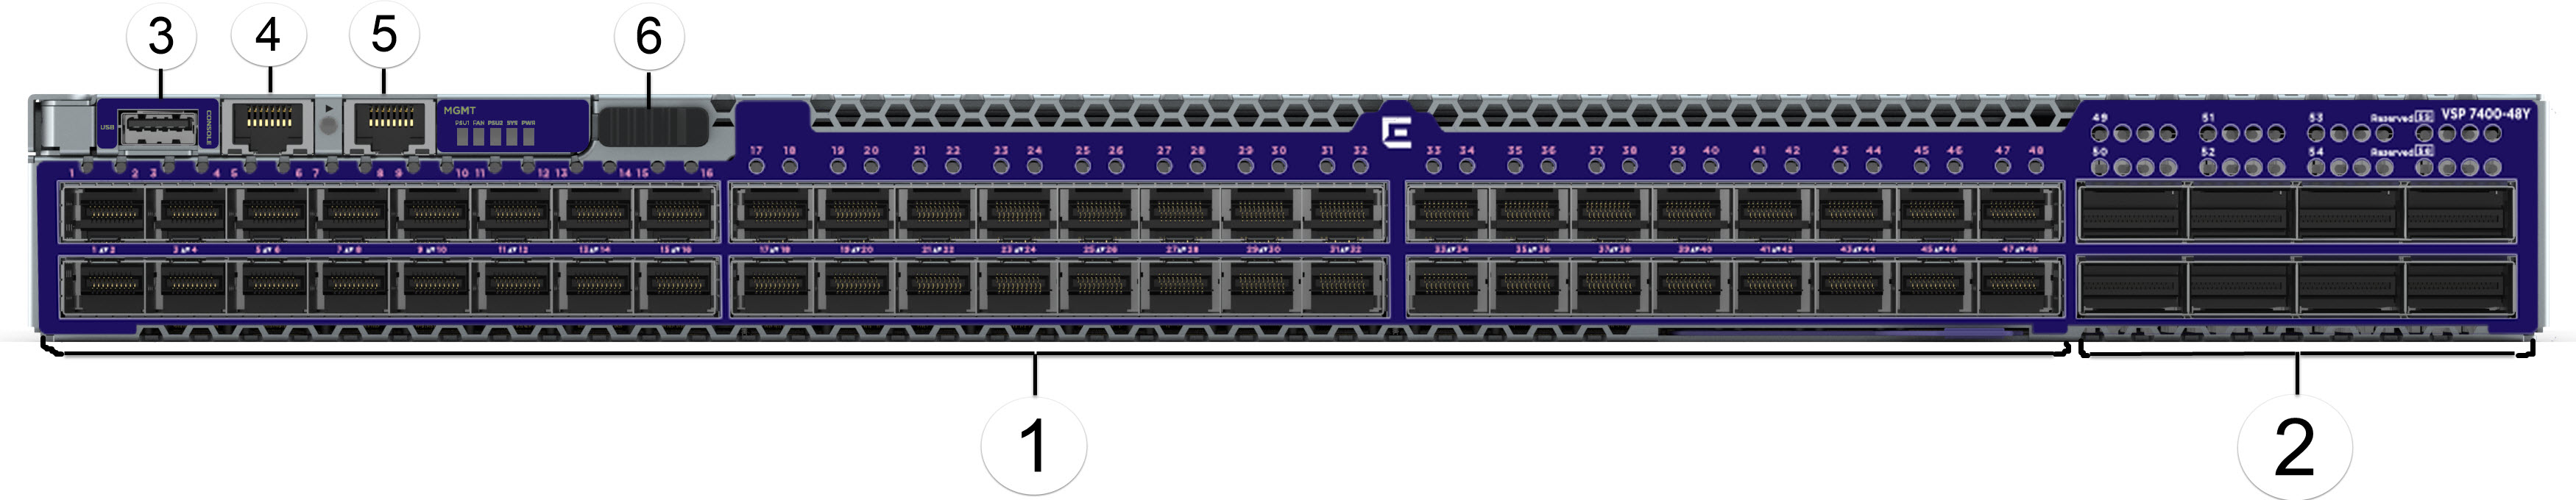 Front panel of the VSP 7400-48Y switch.